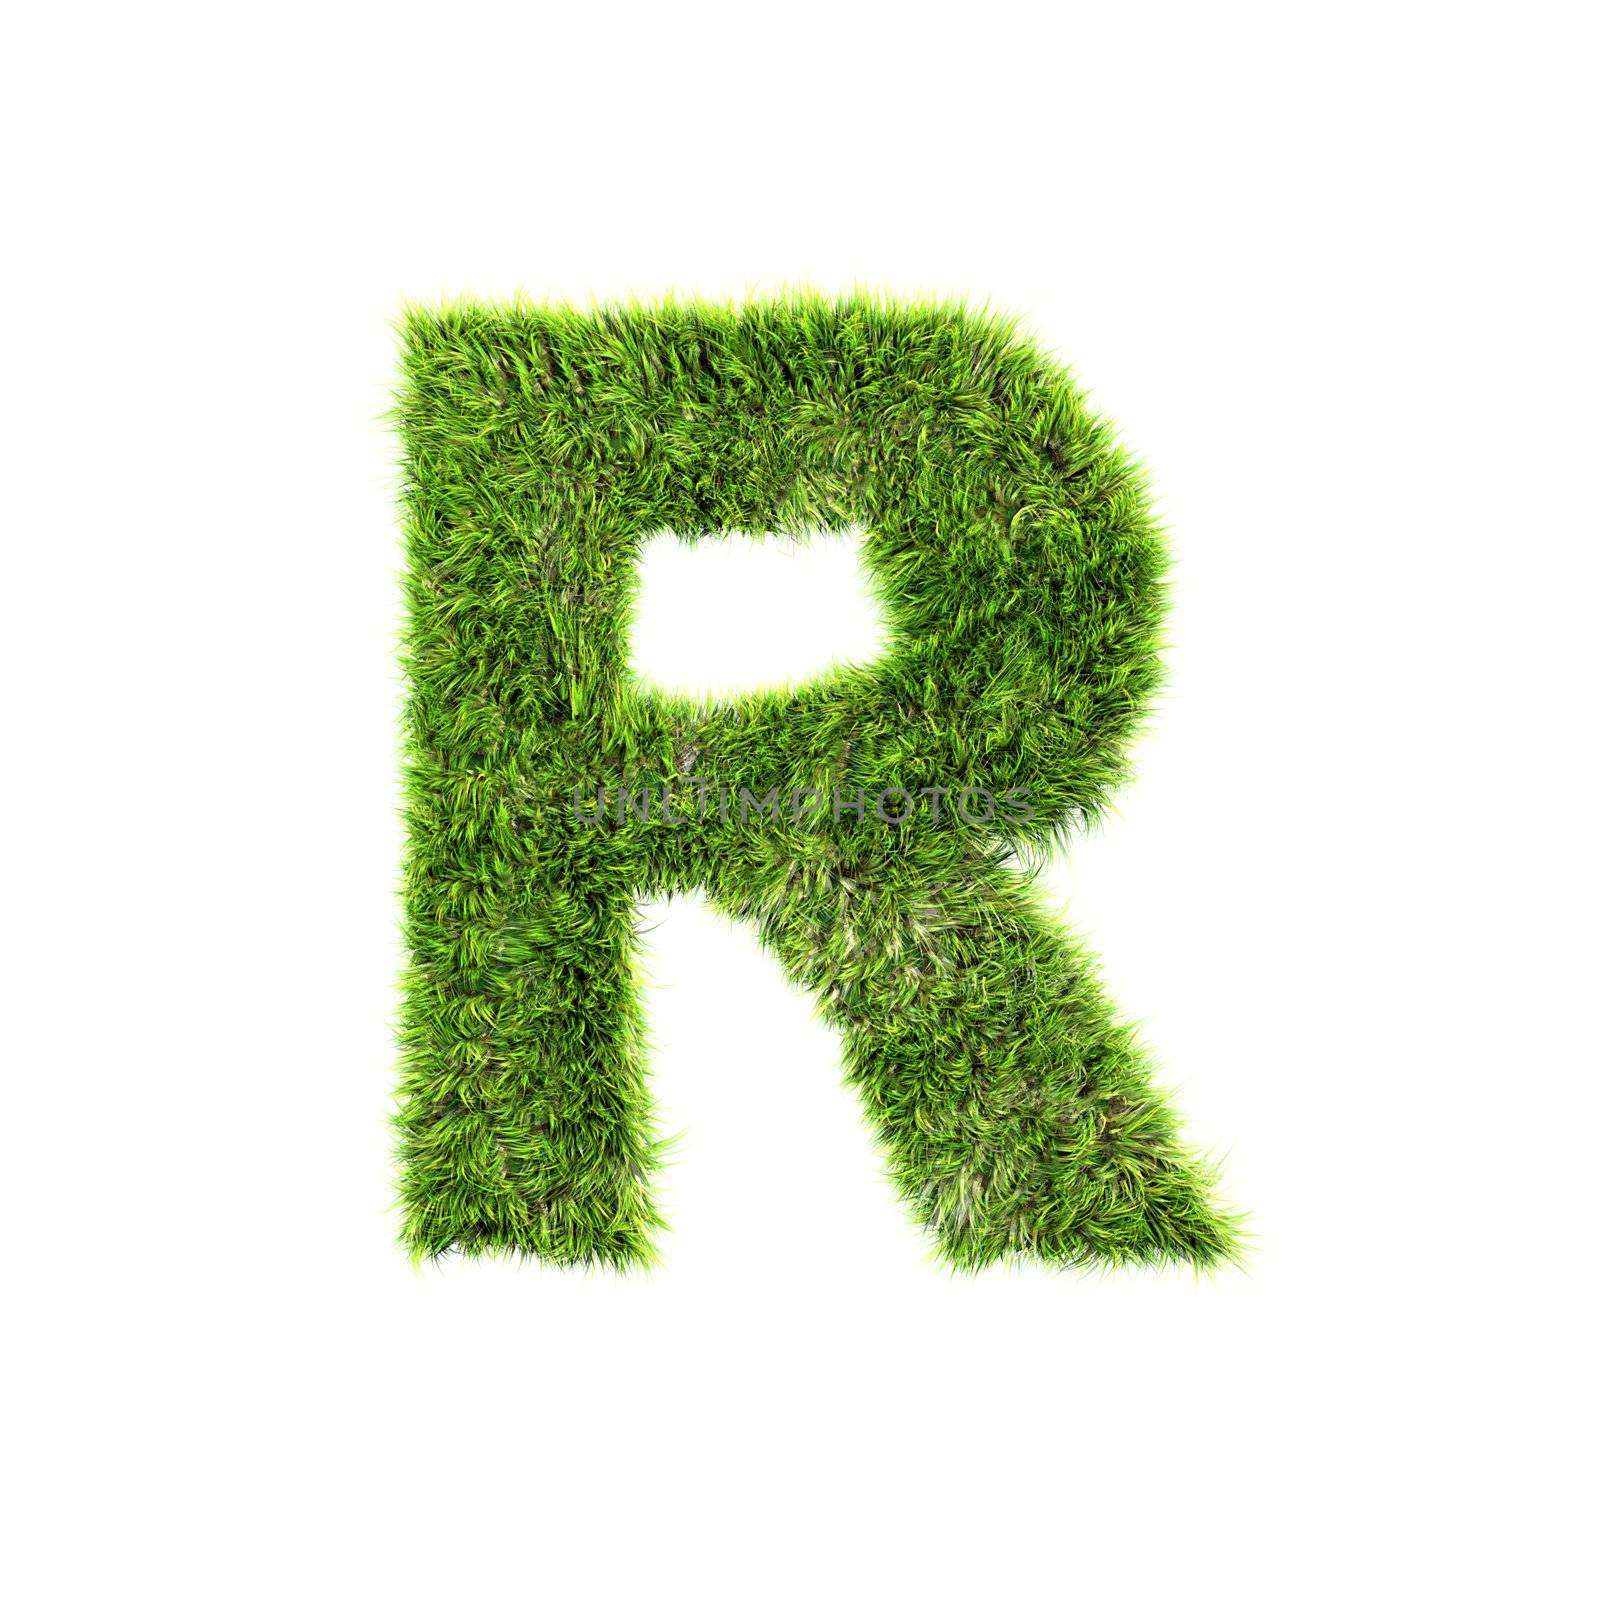 3d grass letter isolated on white background - R by chrisroll